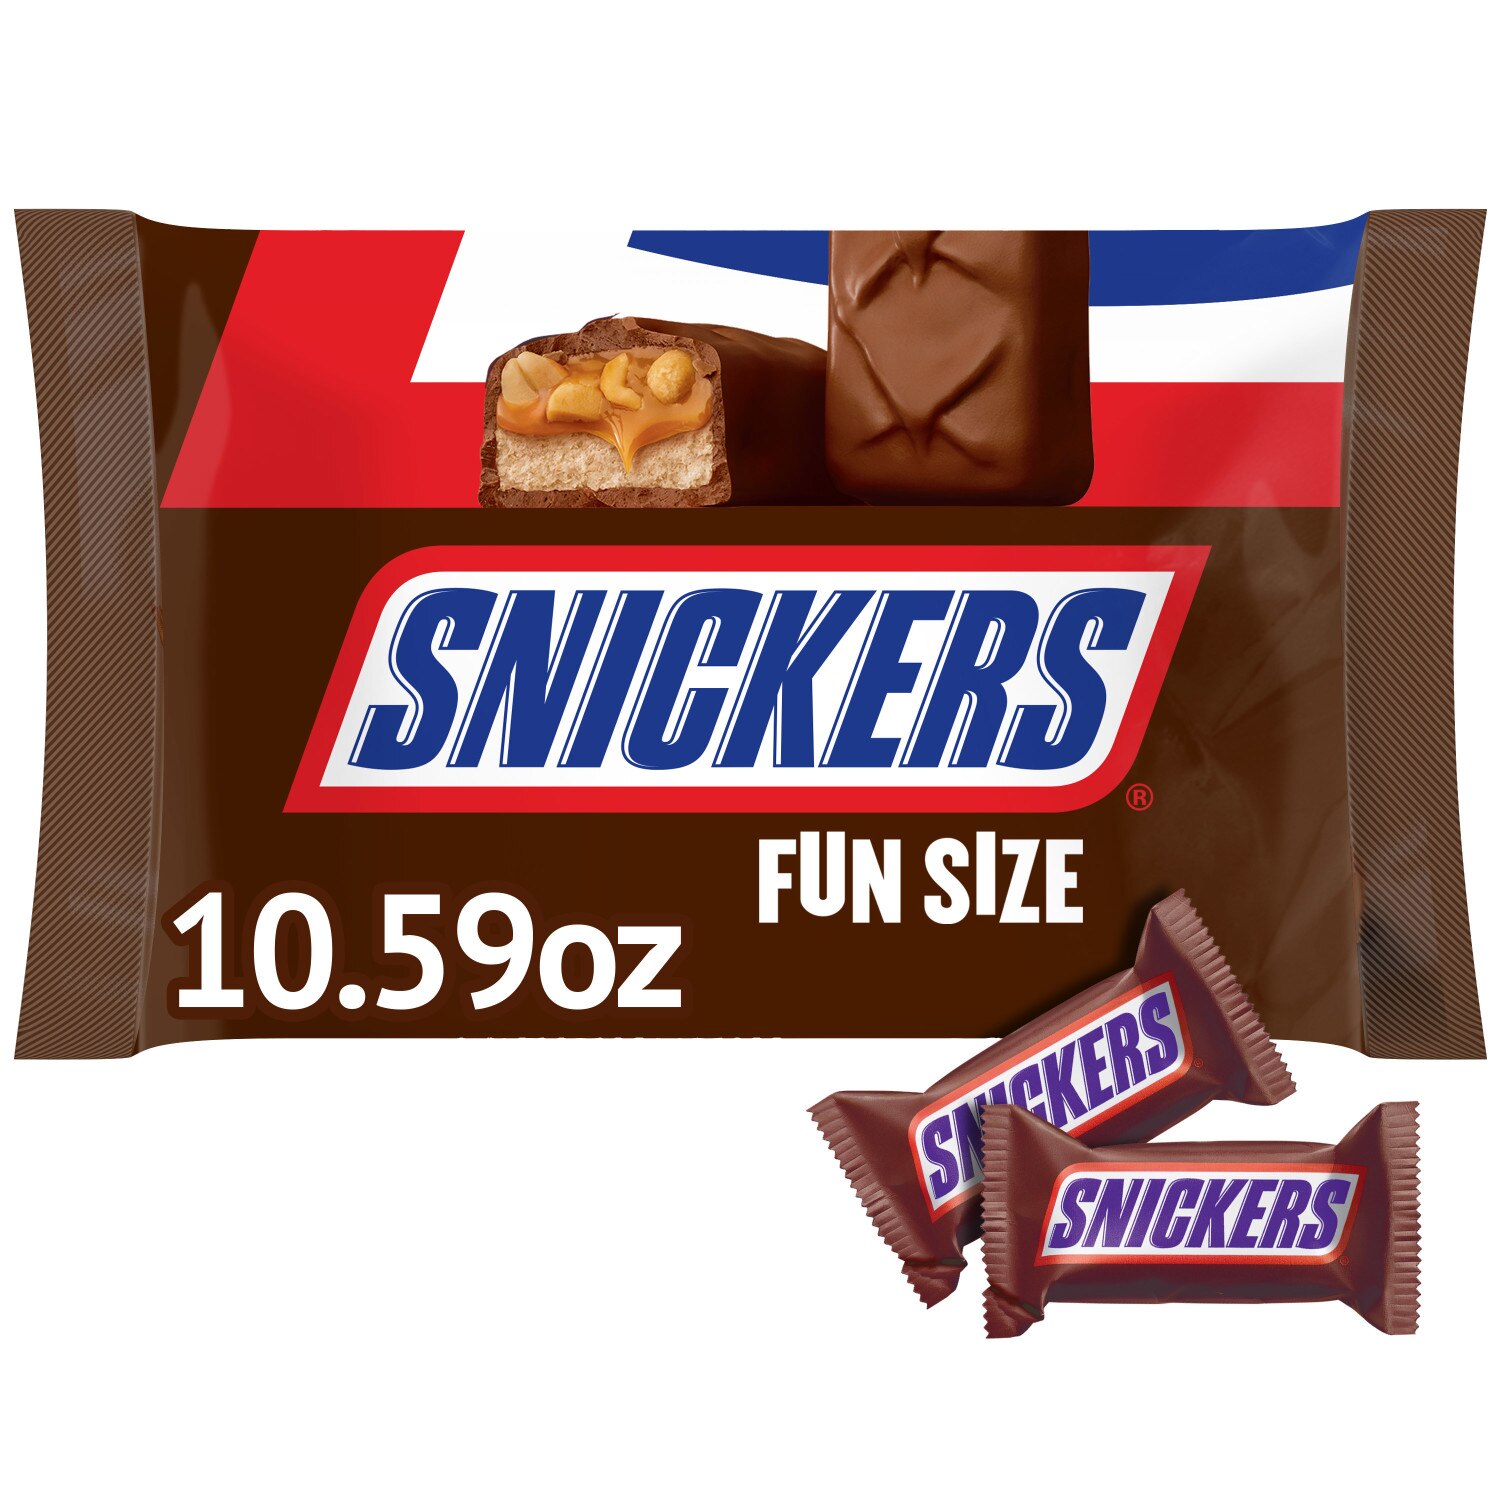 Snickers Fun Size Chocolate Candy Bars, 10.59 oz